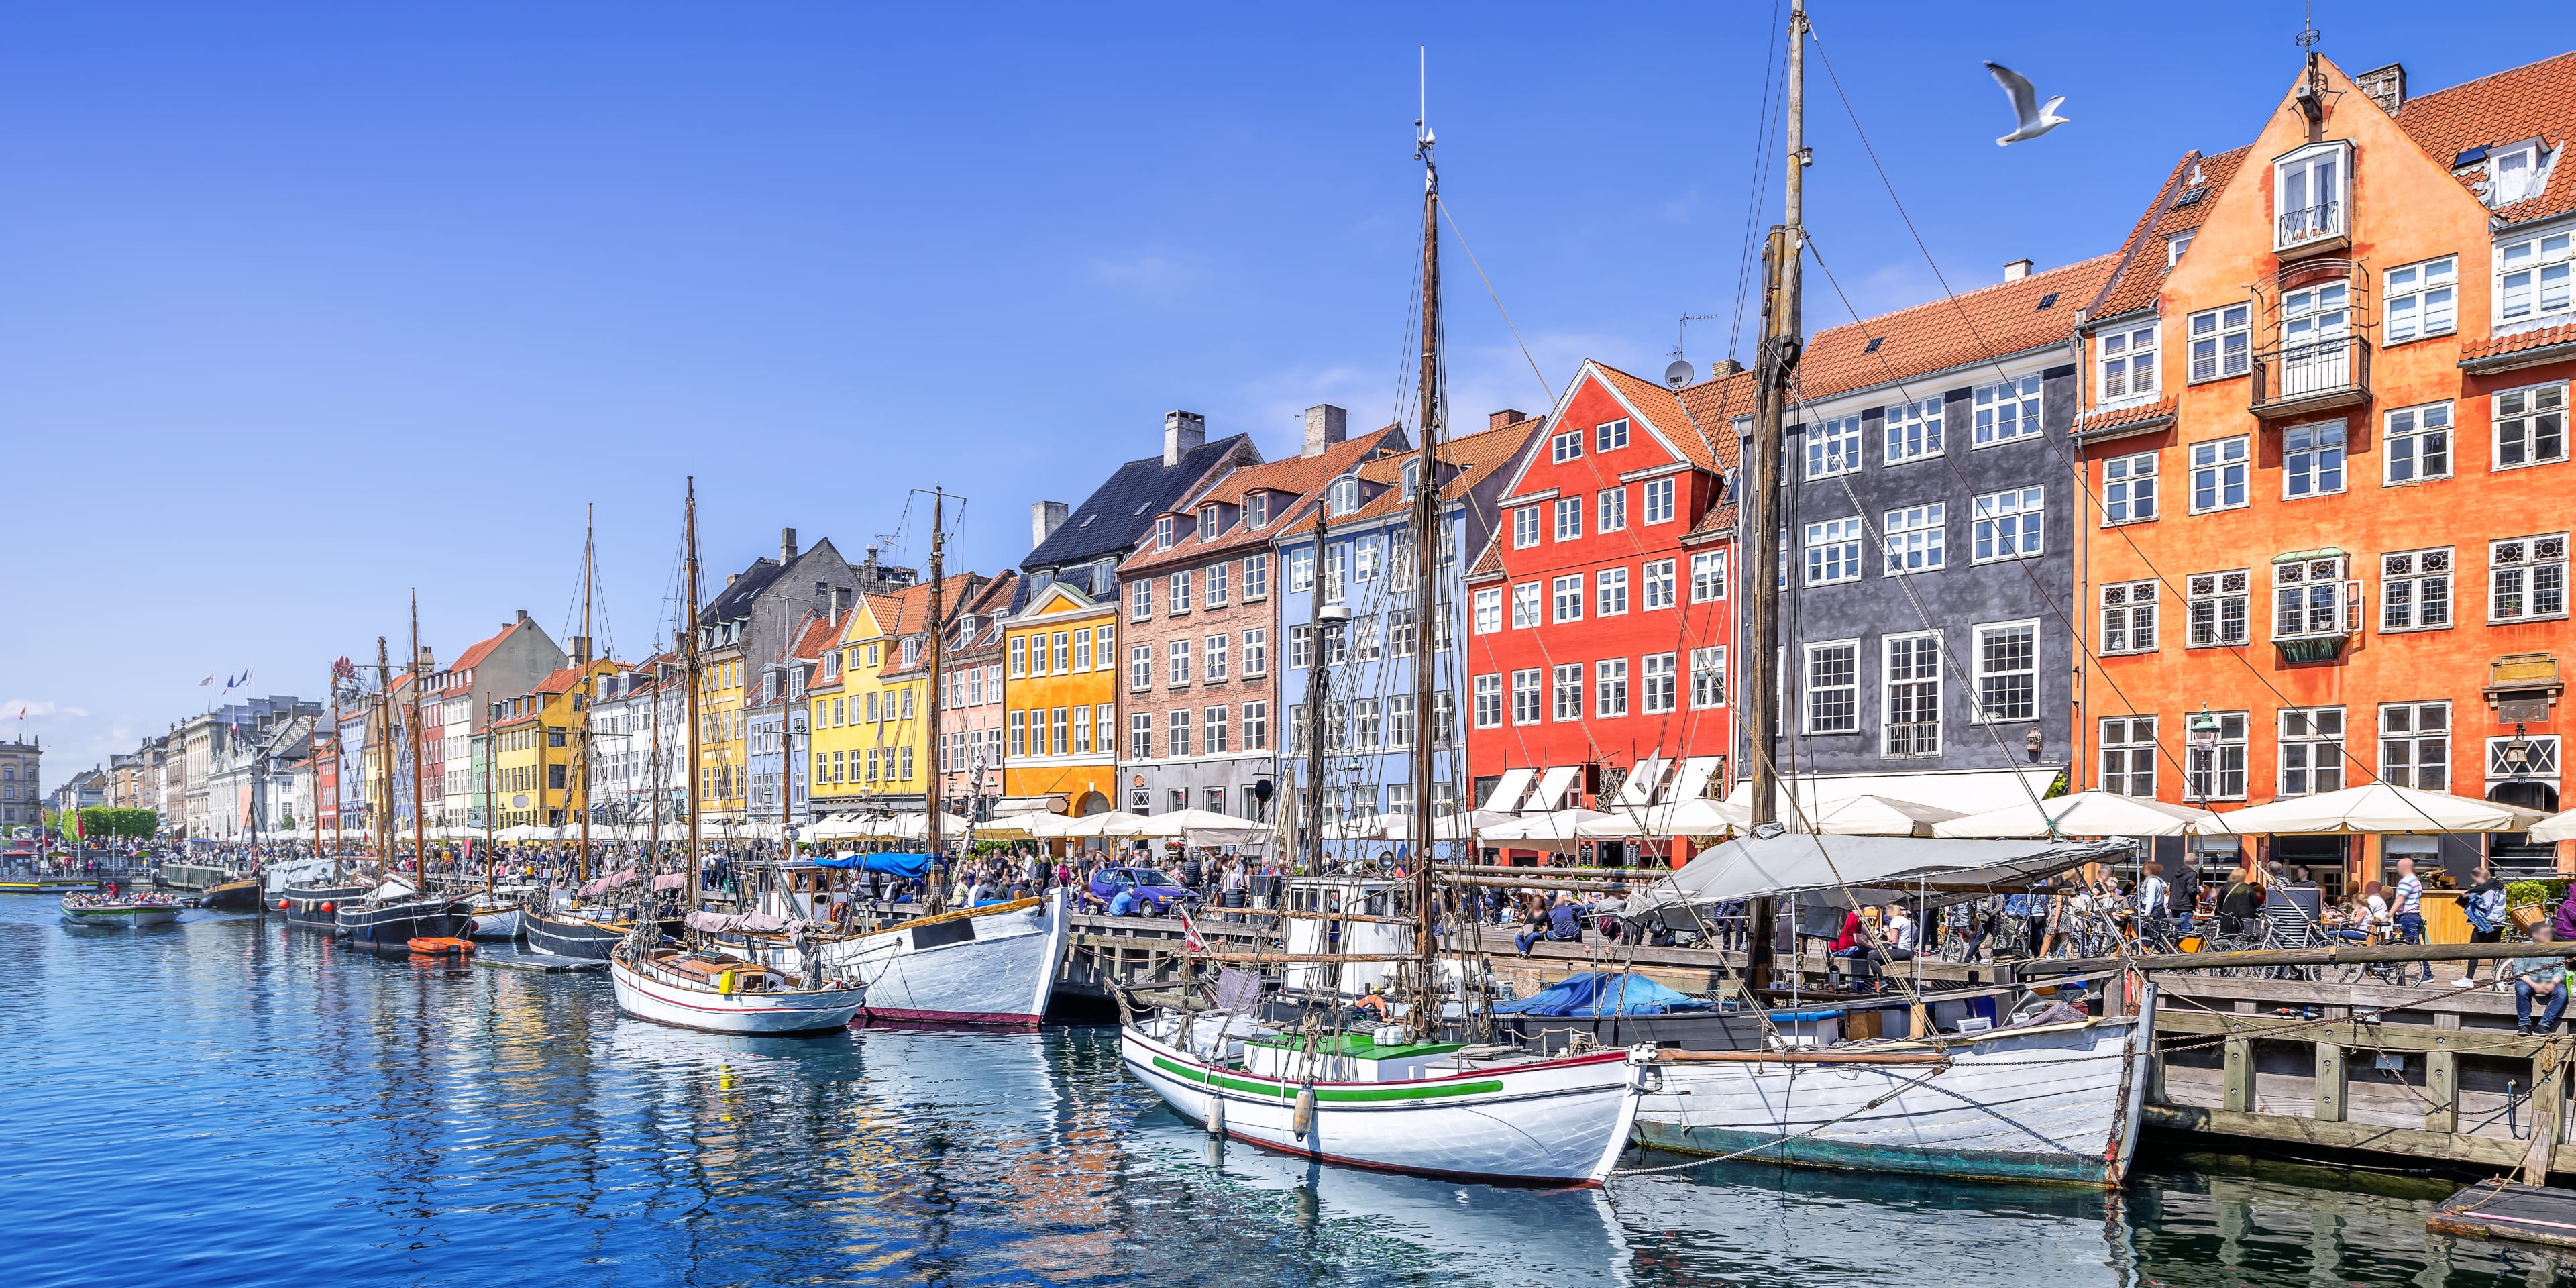 Nyhavn canal lined with colourful houses and boats in the water in Copenhagen, Denmark.